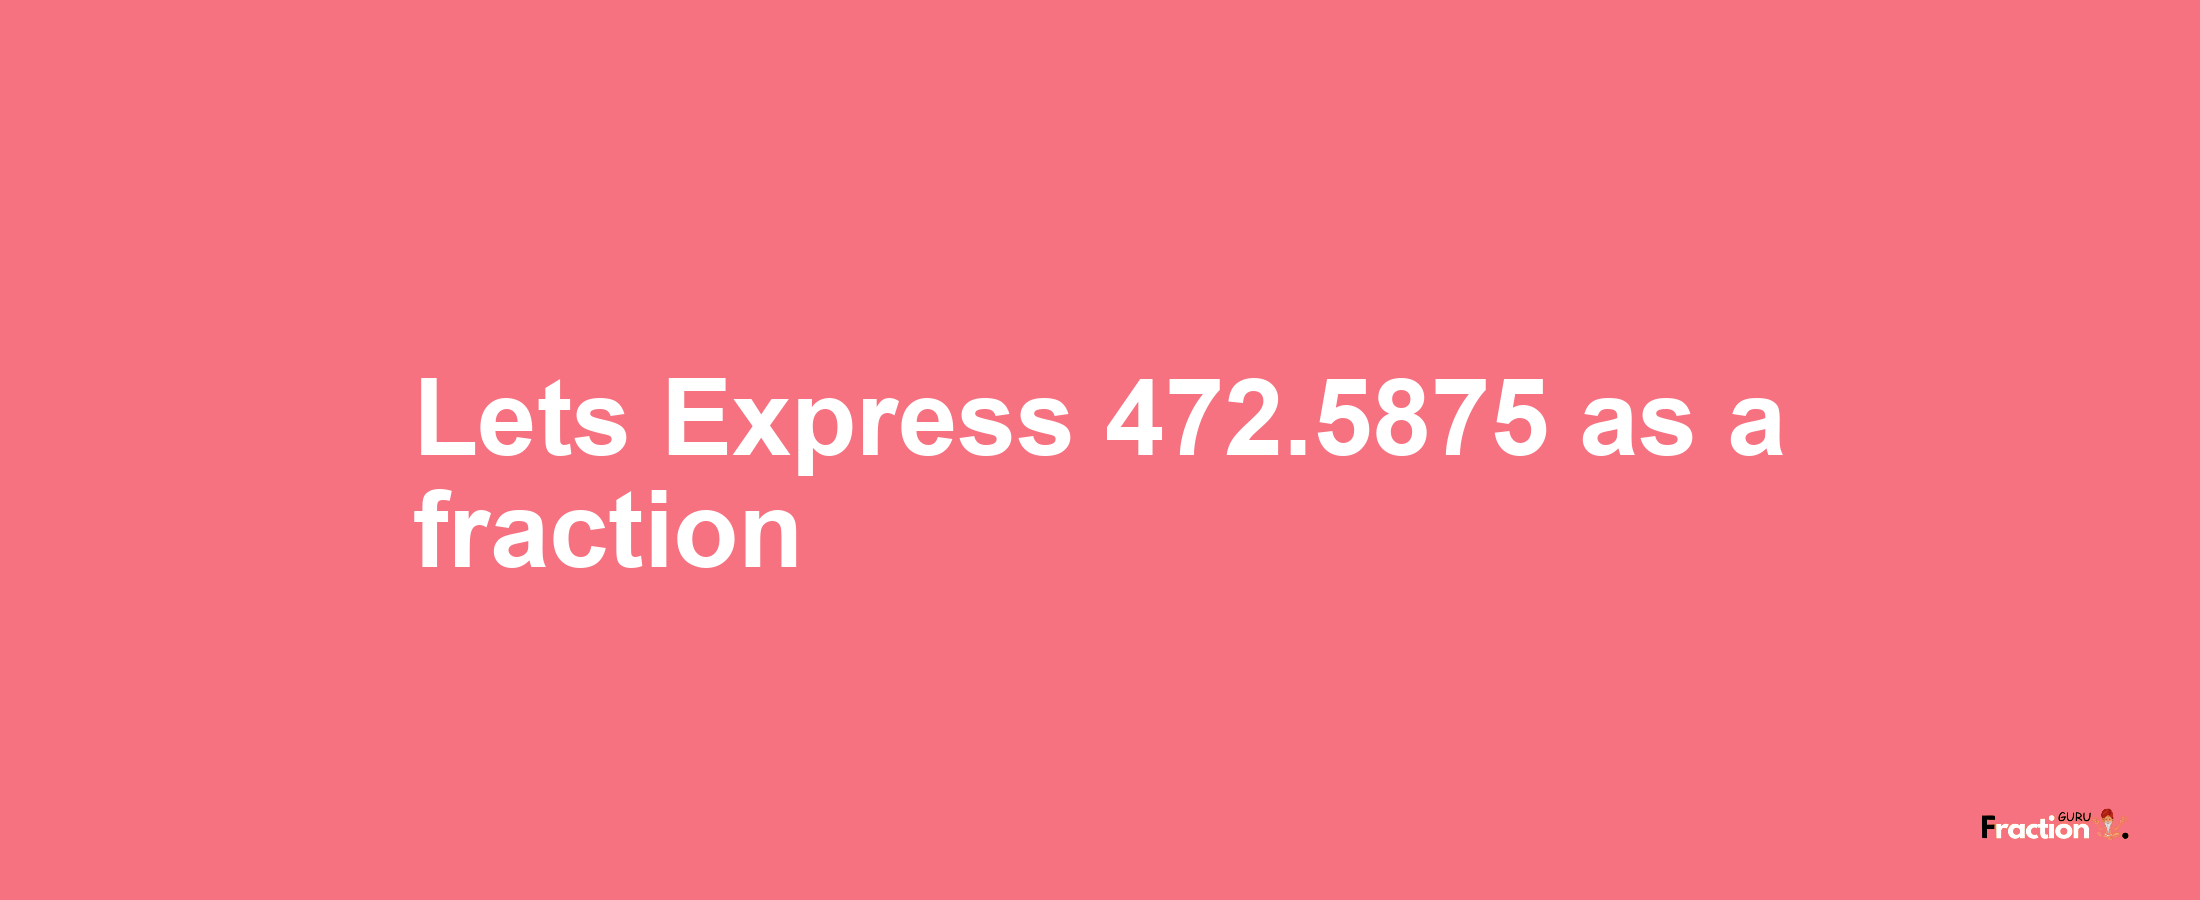 Lets Express 472.5875 as afraction